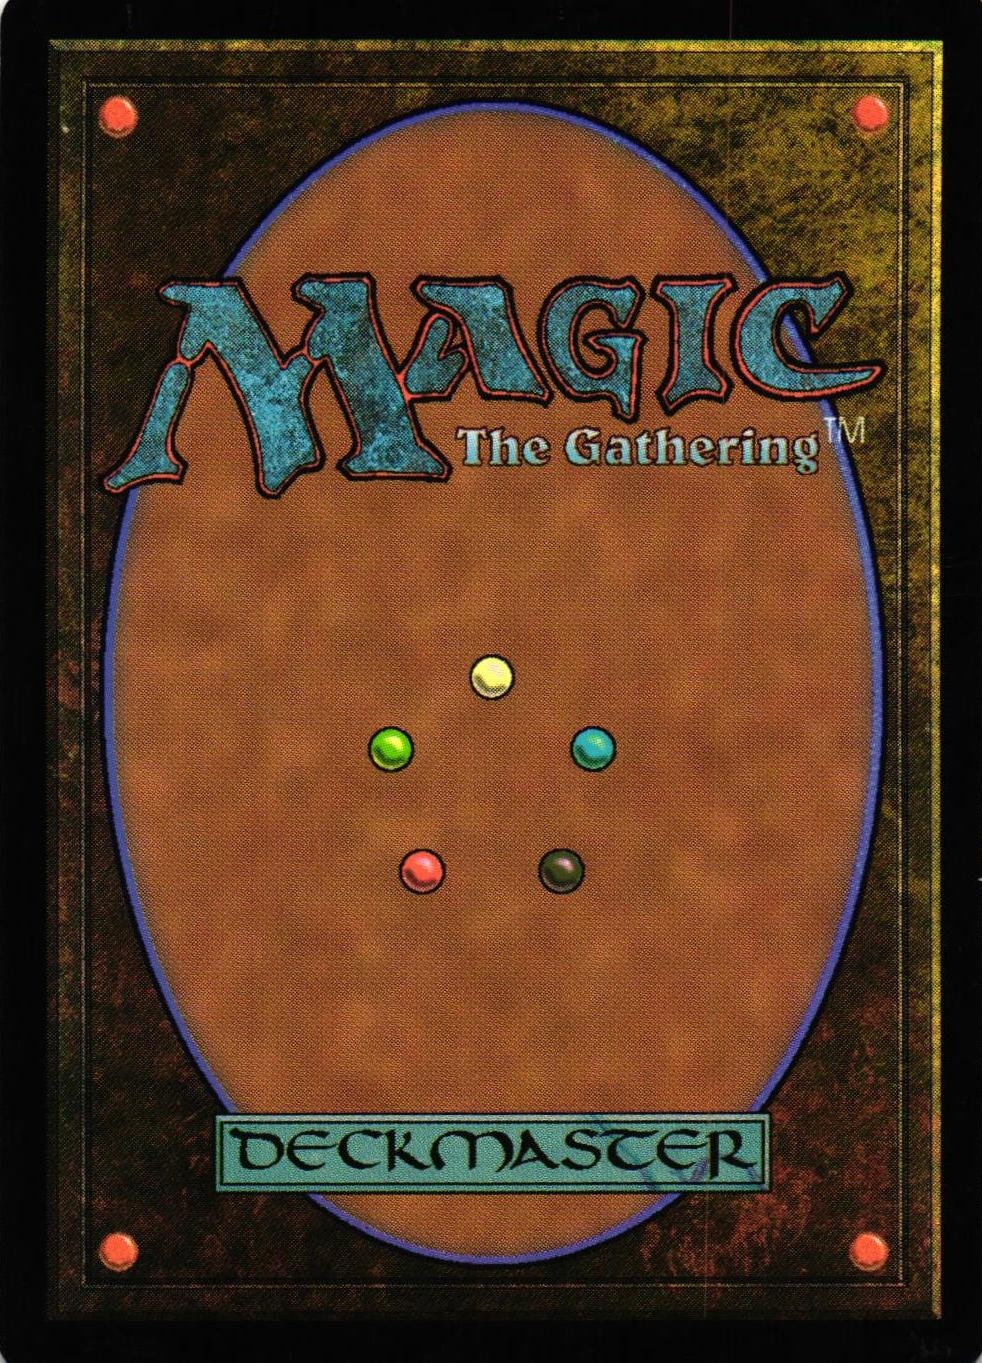 Boon of Erebos Common 80/249 Theros (THS) Magic the Gathering